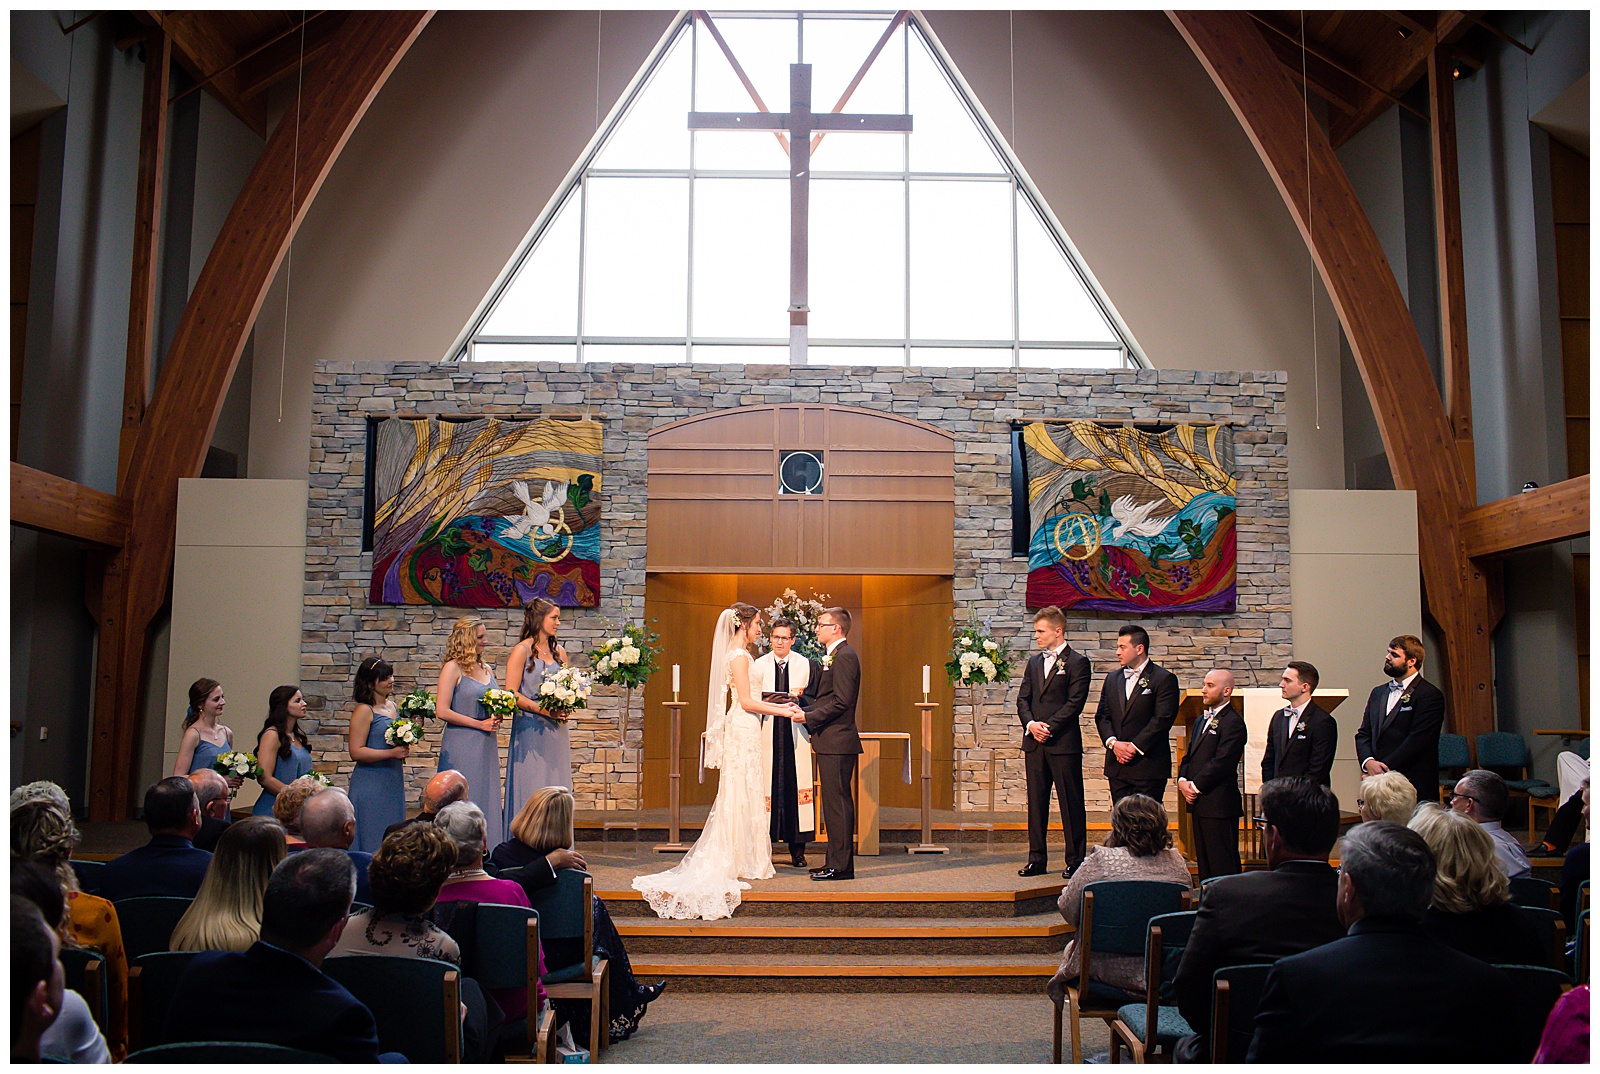 Wedding photography and videography at Church of the Resurrection in Leawood, Kansas, by Kansas City wedding photographers Wisdom-Watson Weddings.